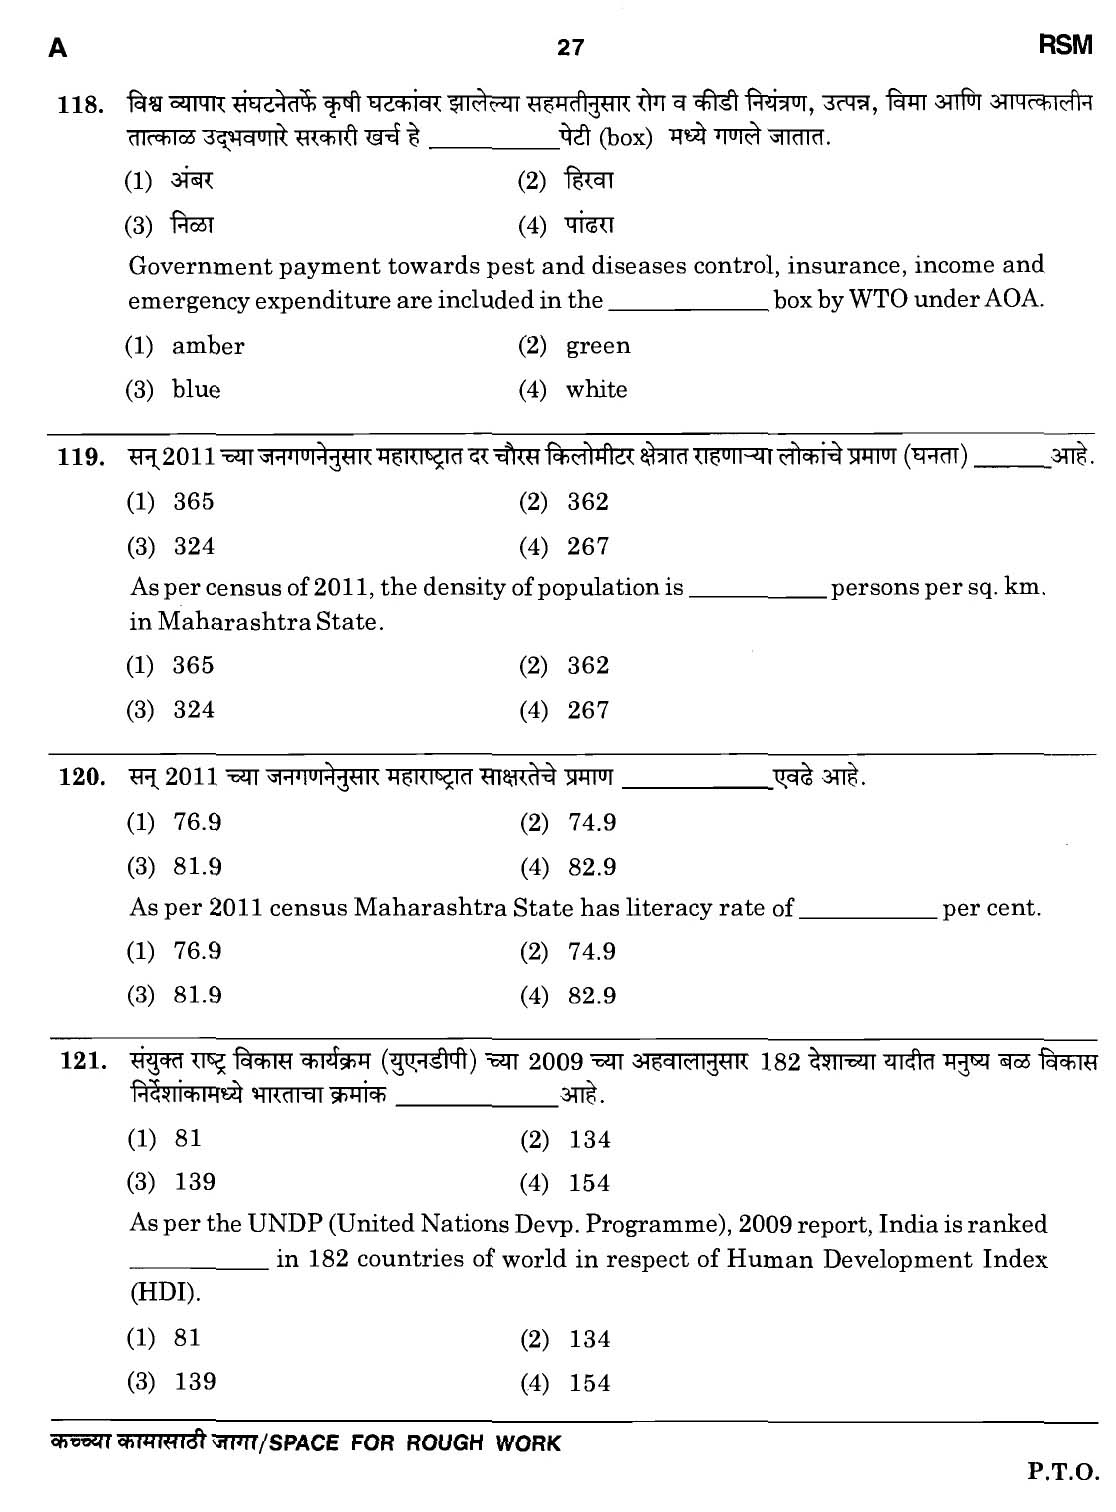 MPSC Agricultural Services Preliminary Exam 2011 Question Paper 26